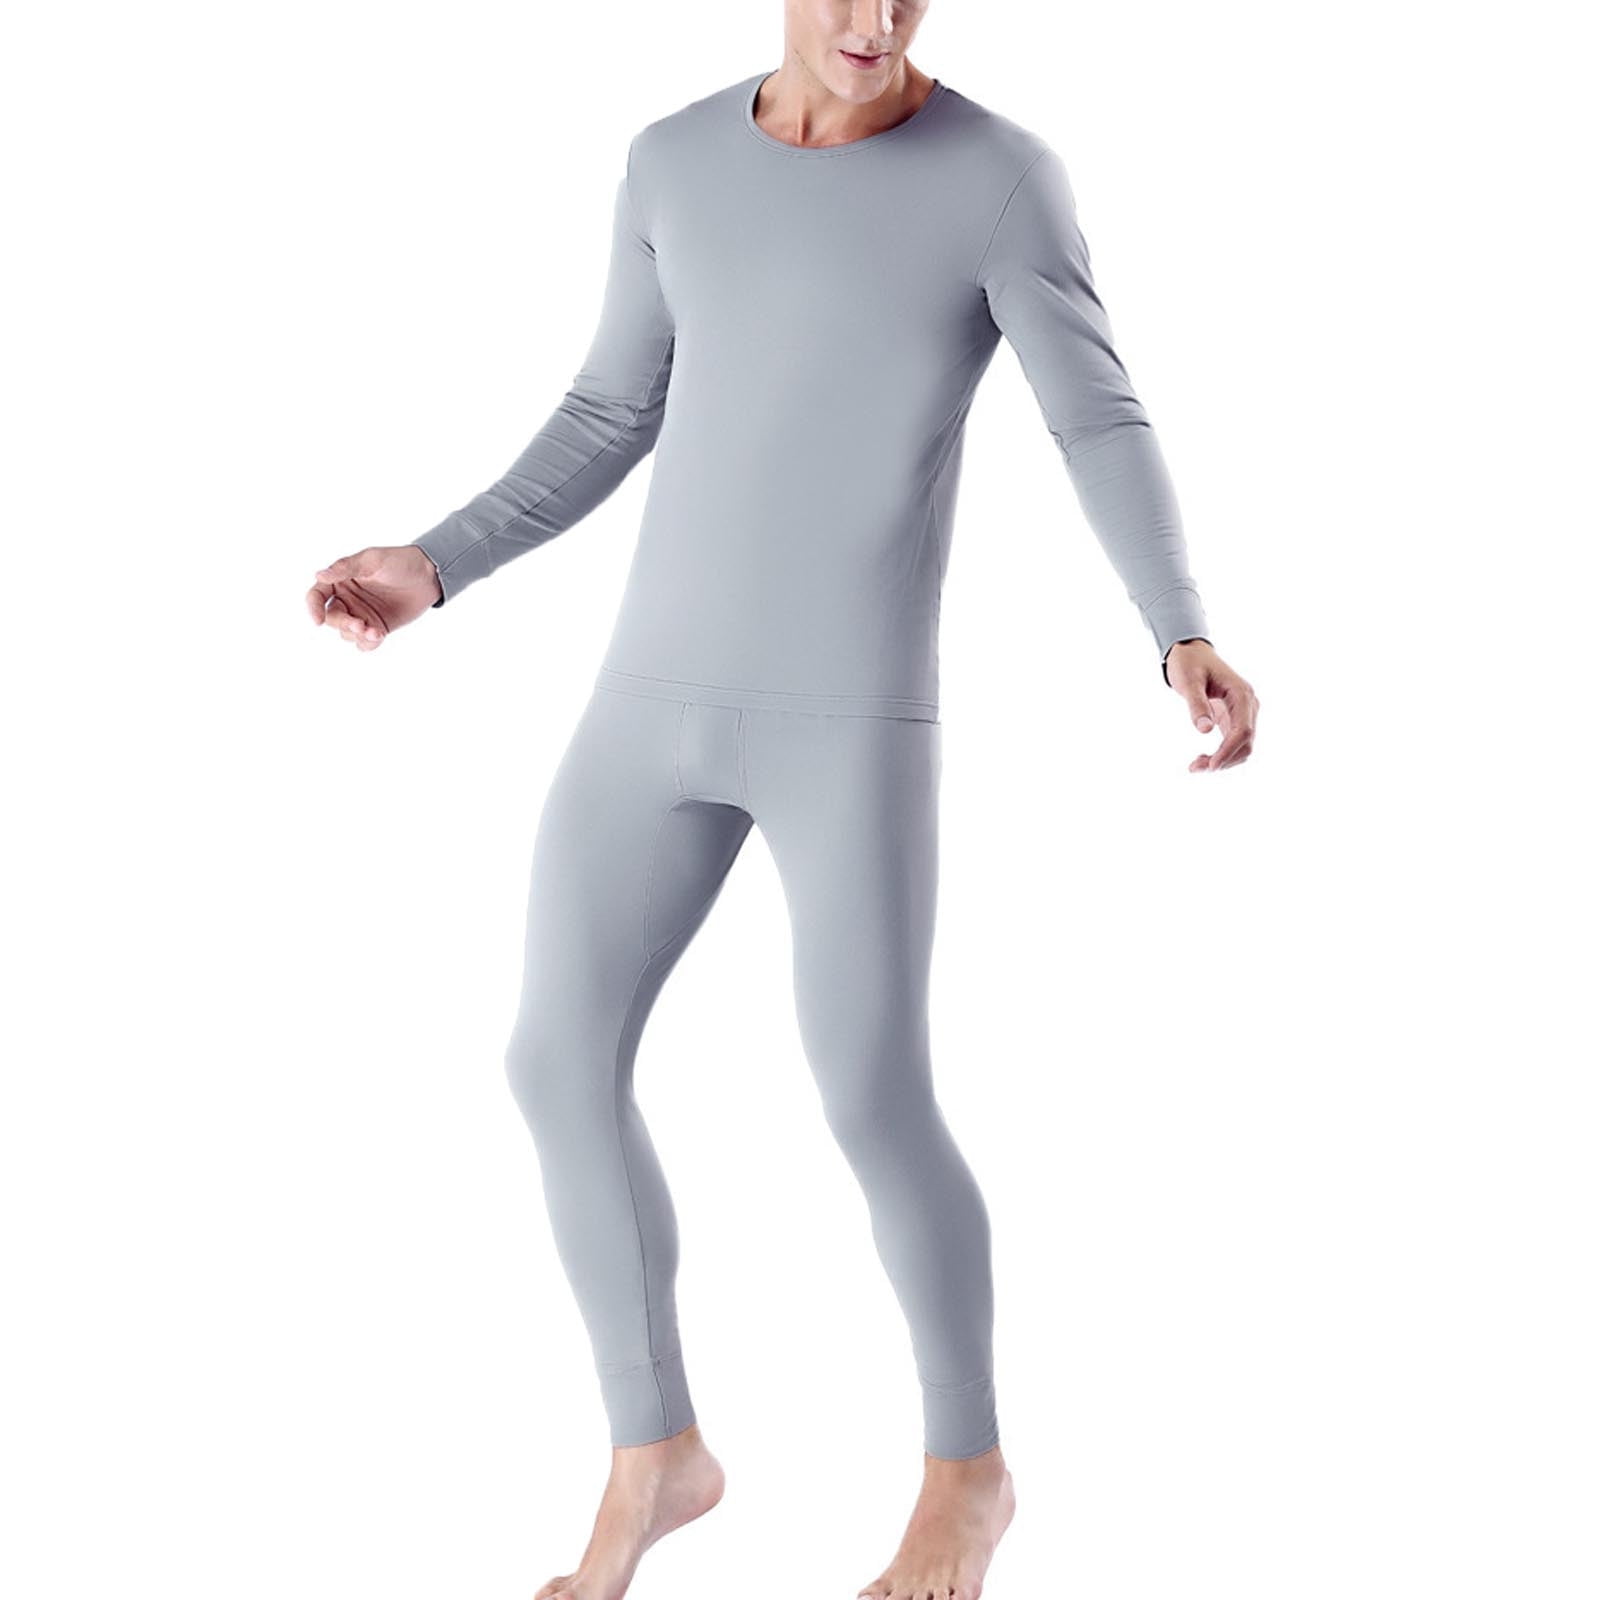 Mens Thermal Insulated Underwear Fleece Base Layer Top